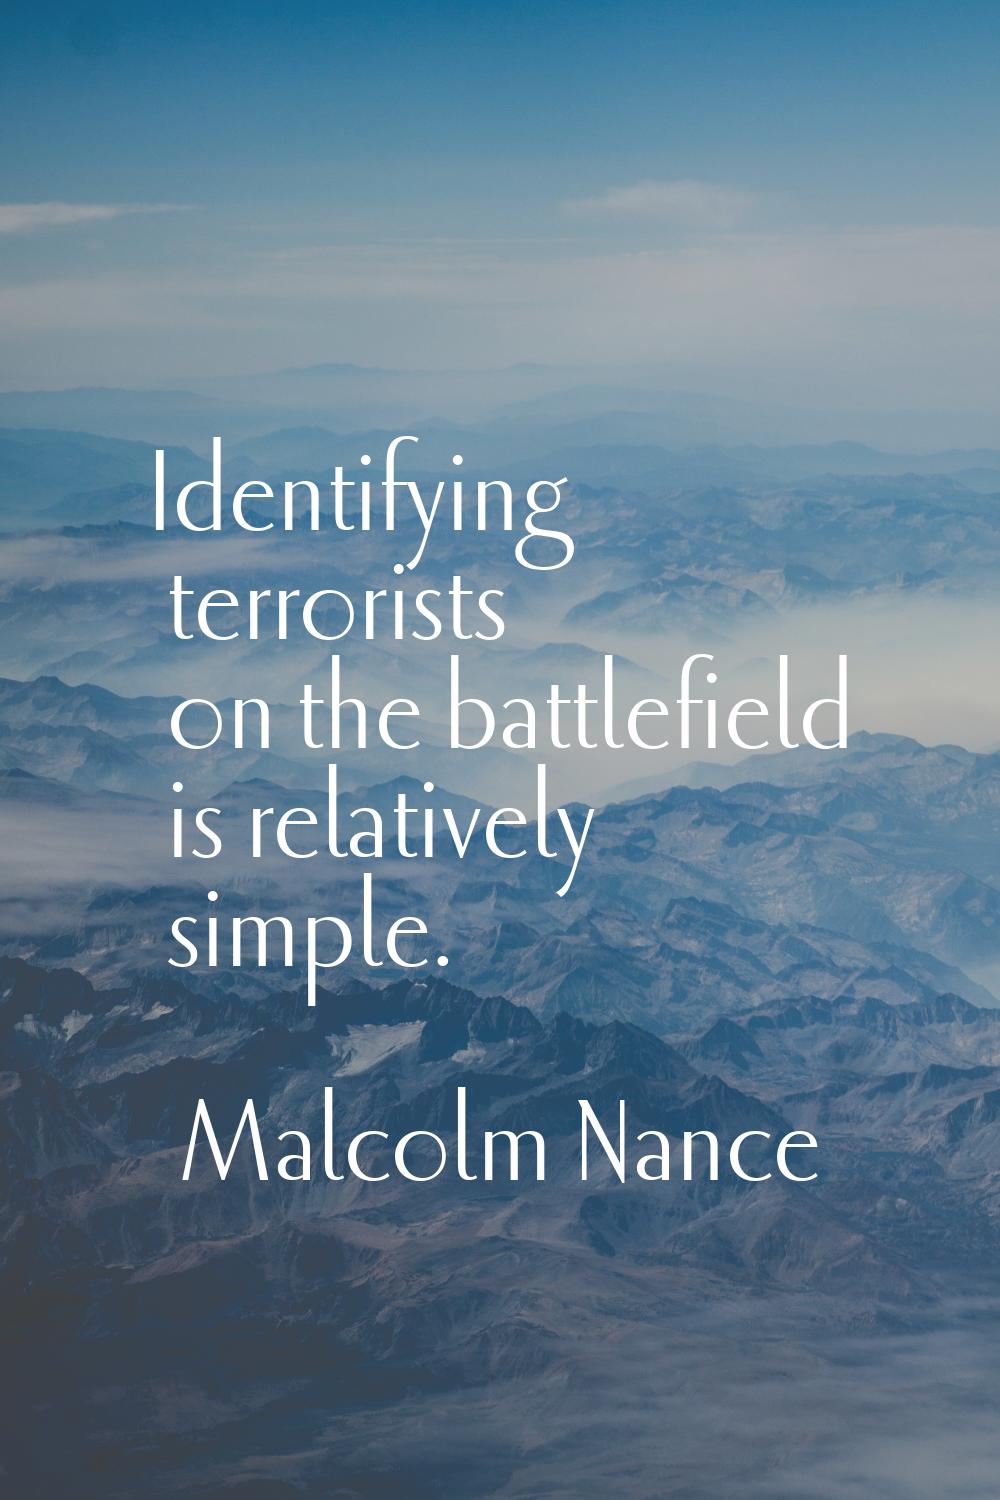 Identifying terrorists on the battlefield is relatively simple.